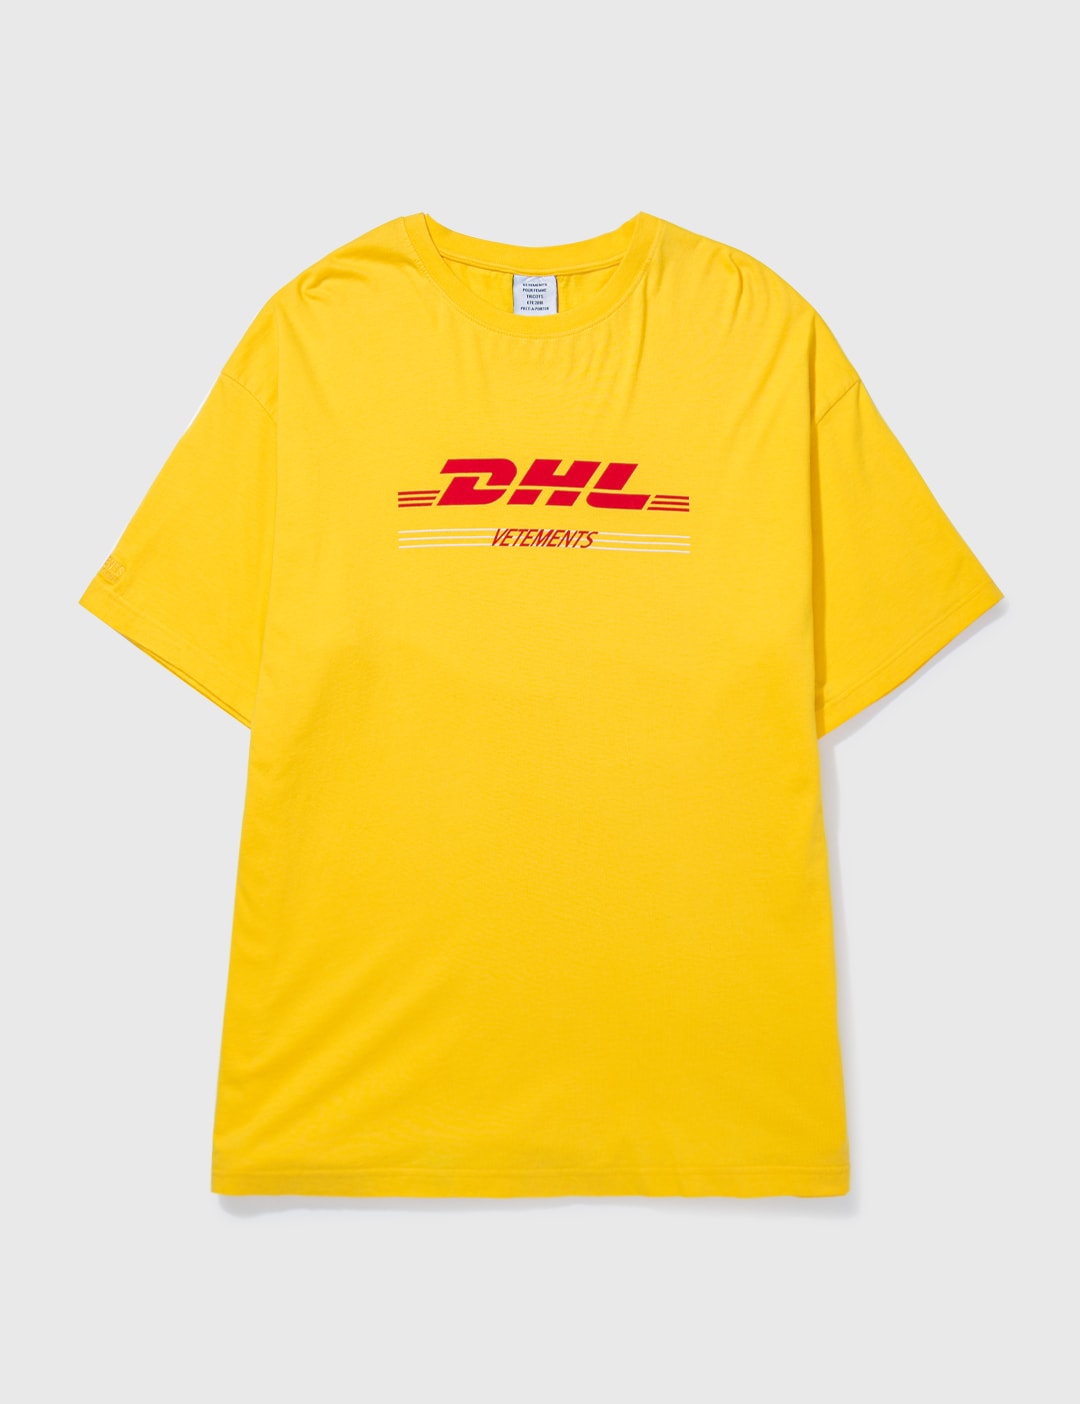 Vetements - VETEMENTS DHL DOUBLE LAYERED T-SHIRT | - Globally Curated Fashion and Lifestyle by Hypebeast